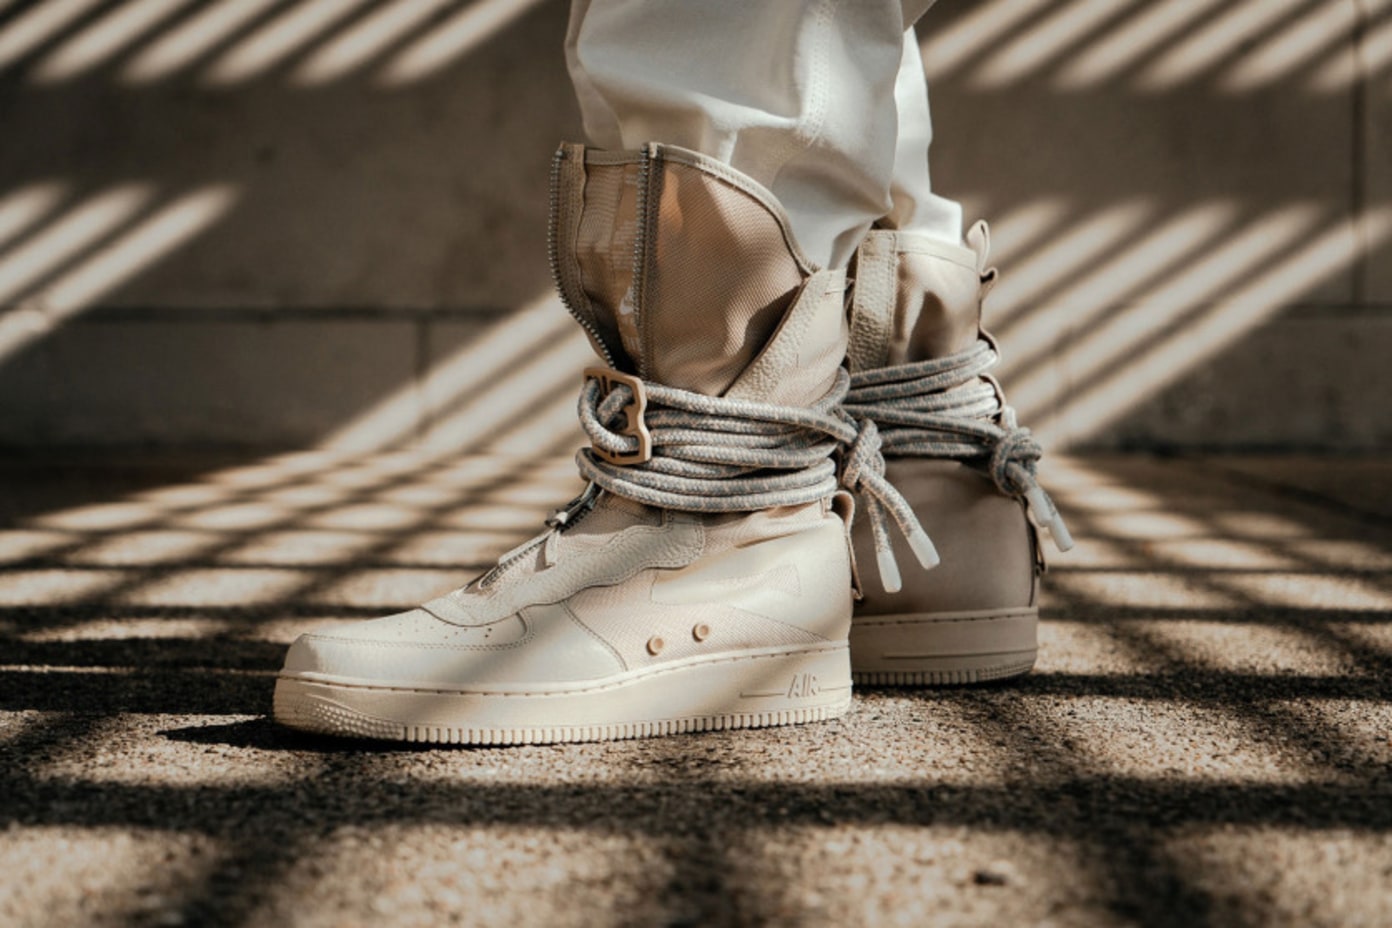 nike air force 1 high special field